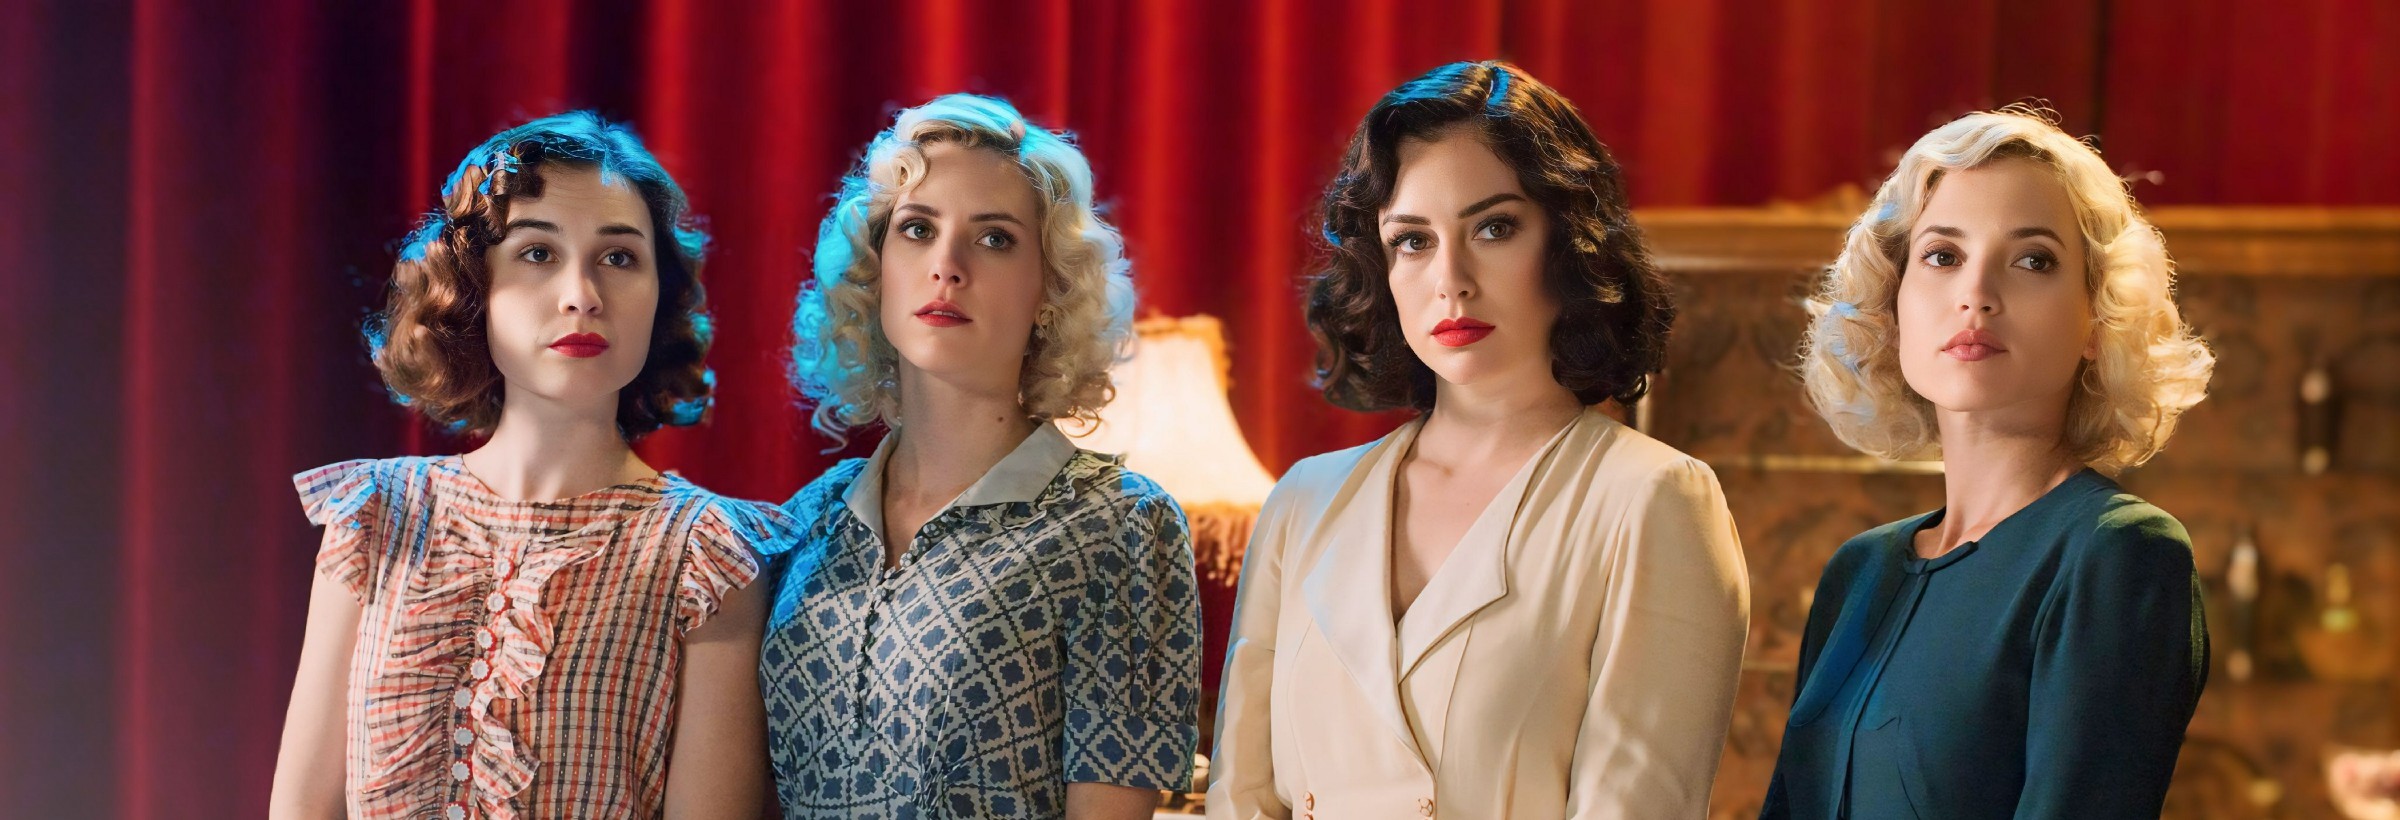 Cable Girls (2019)